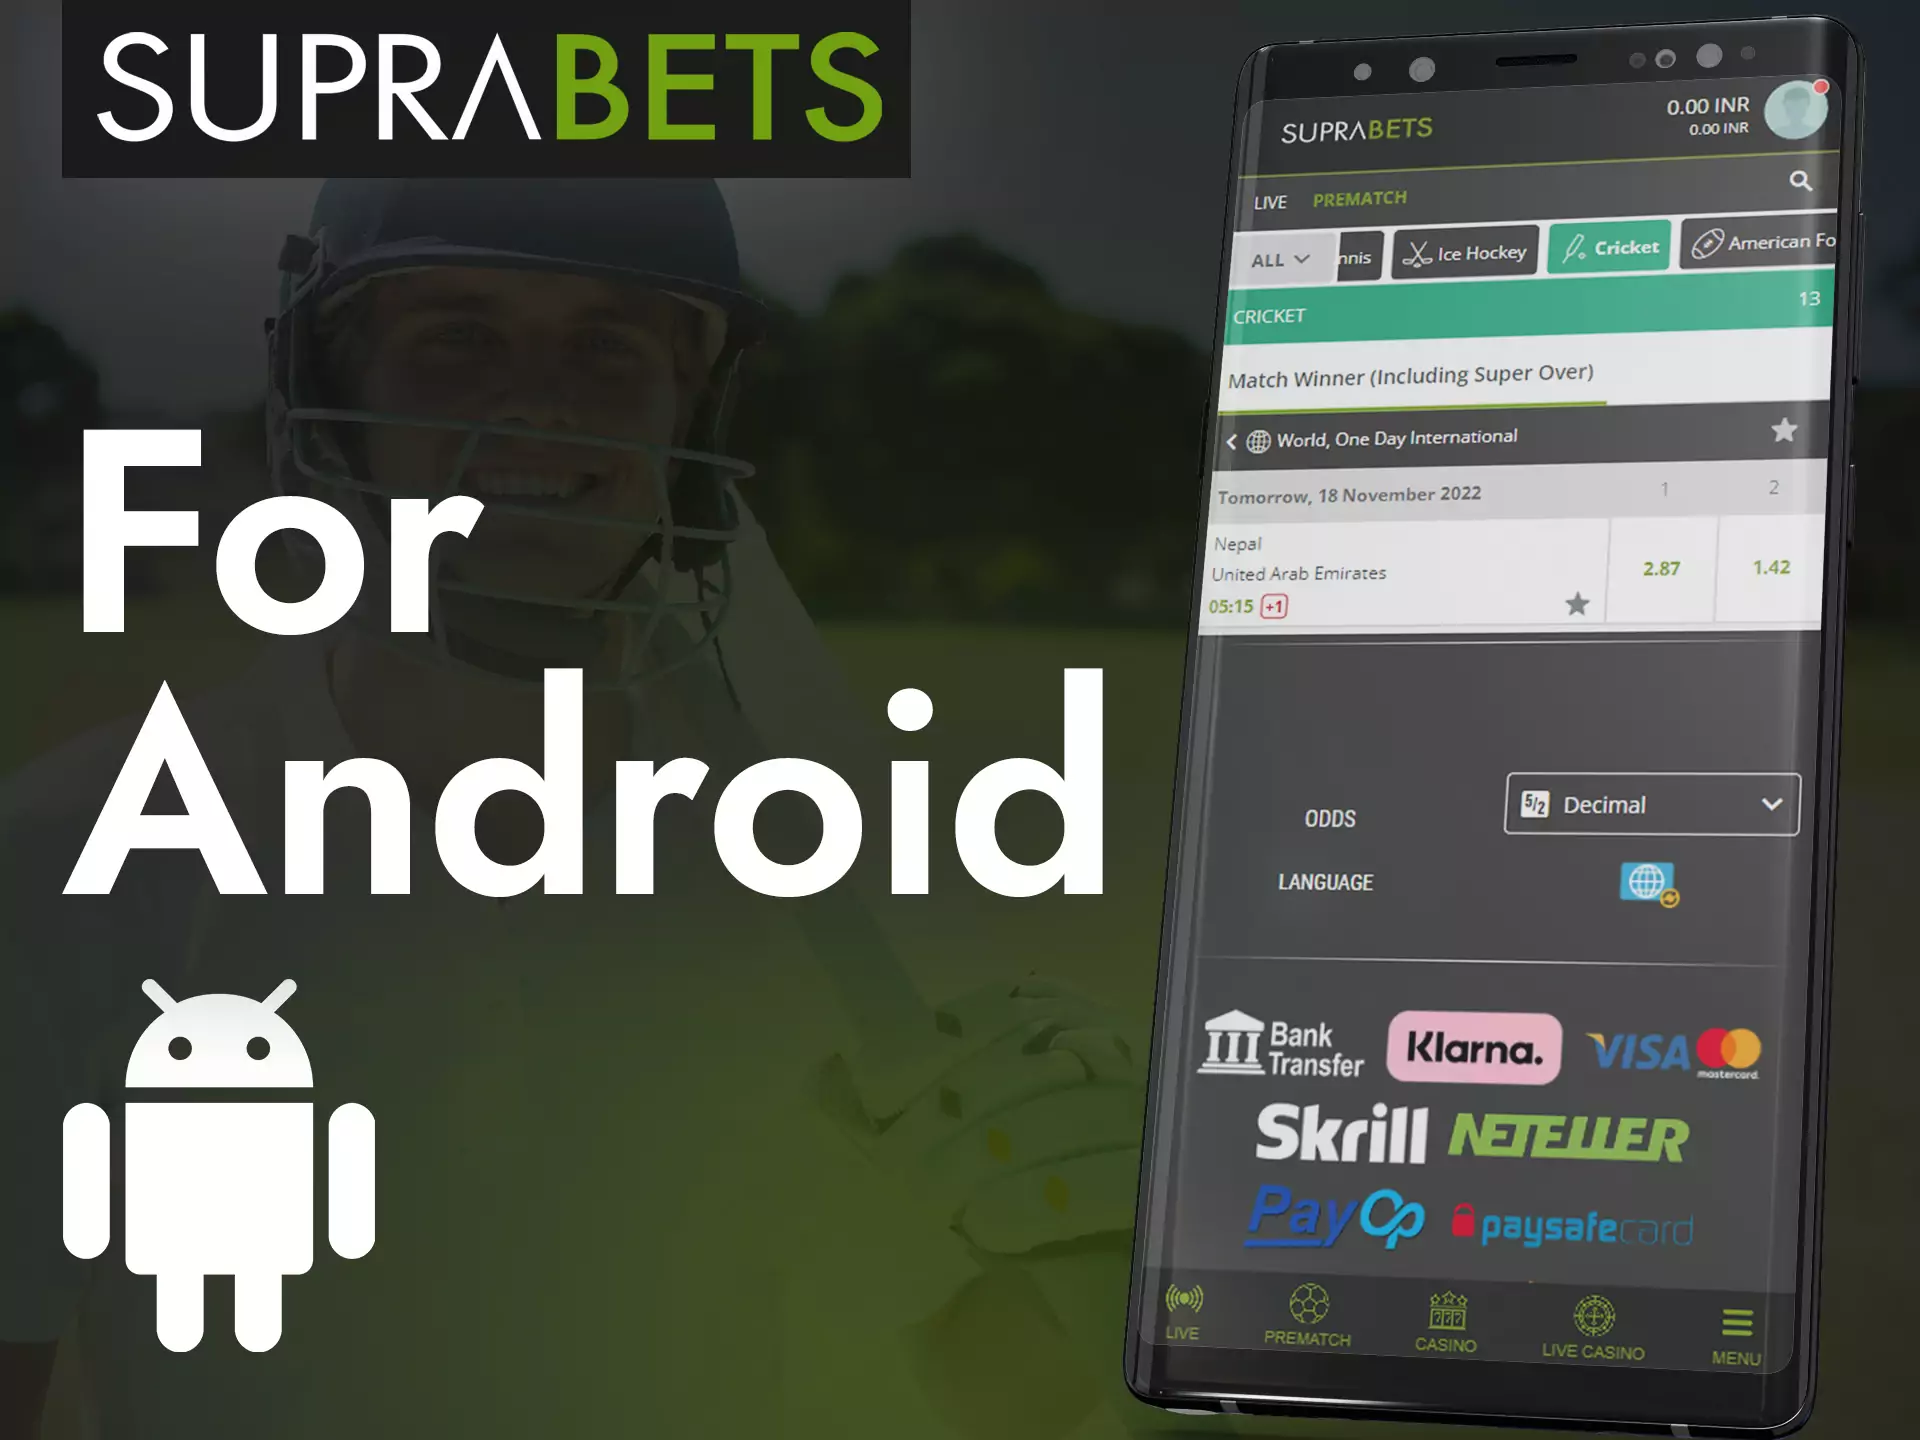 You can use Suprabets on your Android device and enjoy the game.